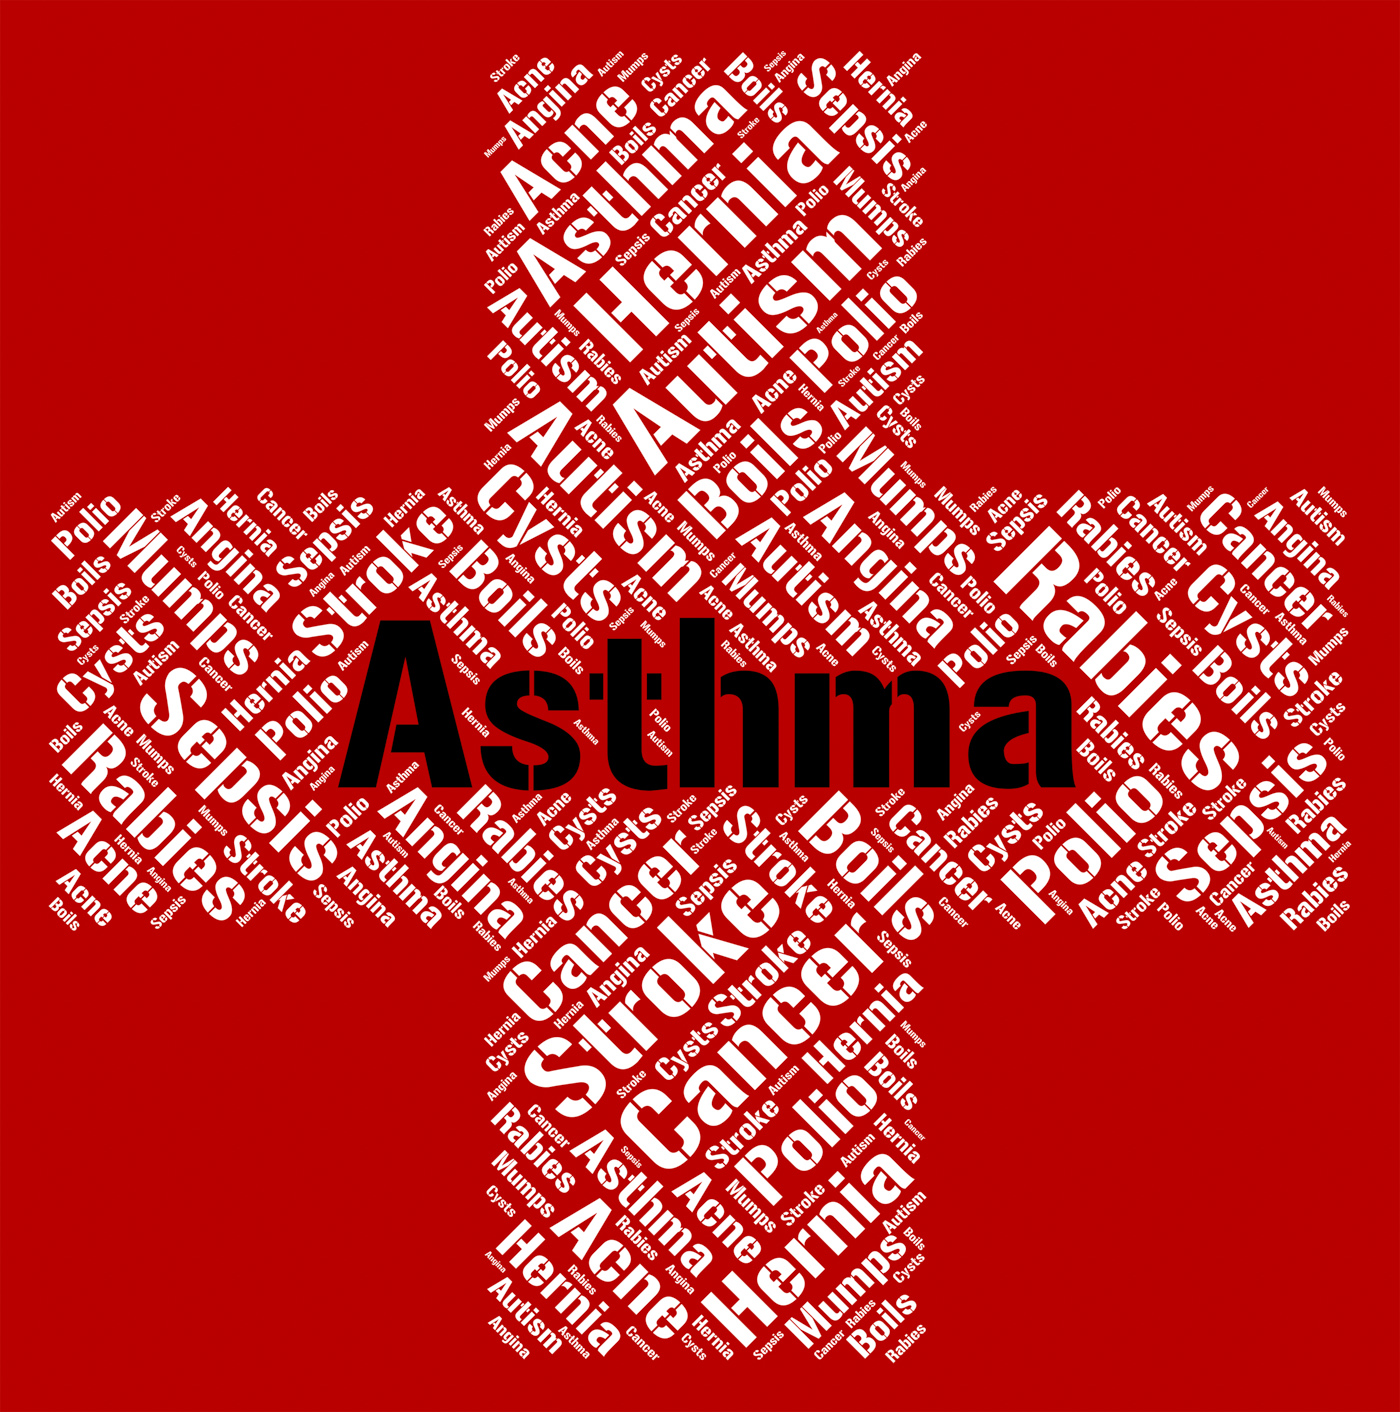 Asthma word indicates poor health and afflictions photo